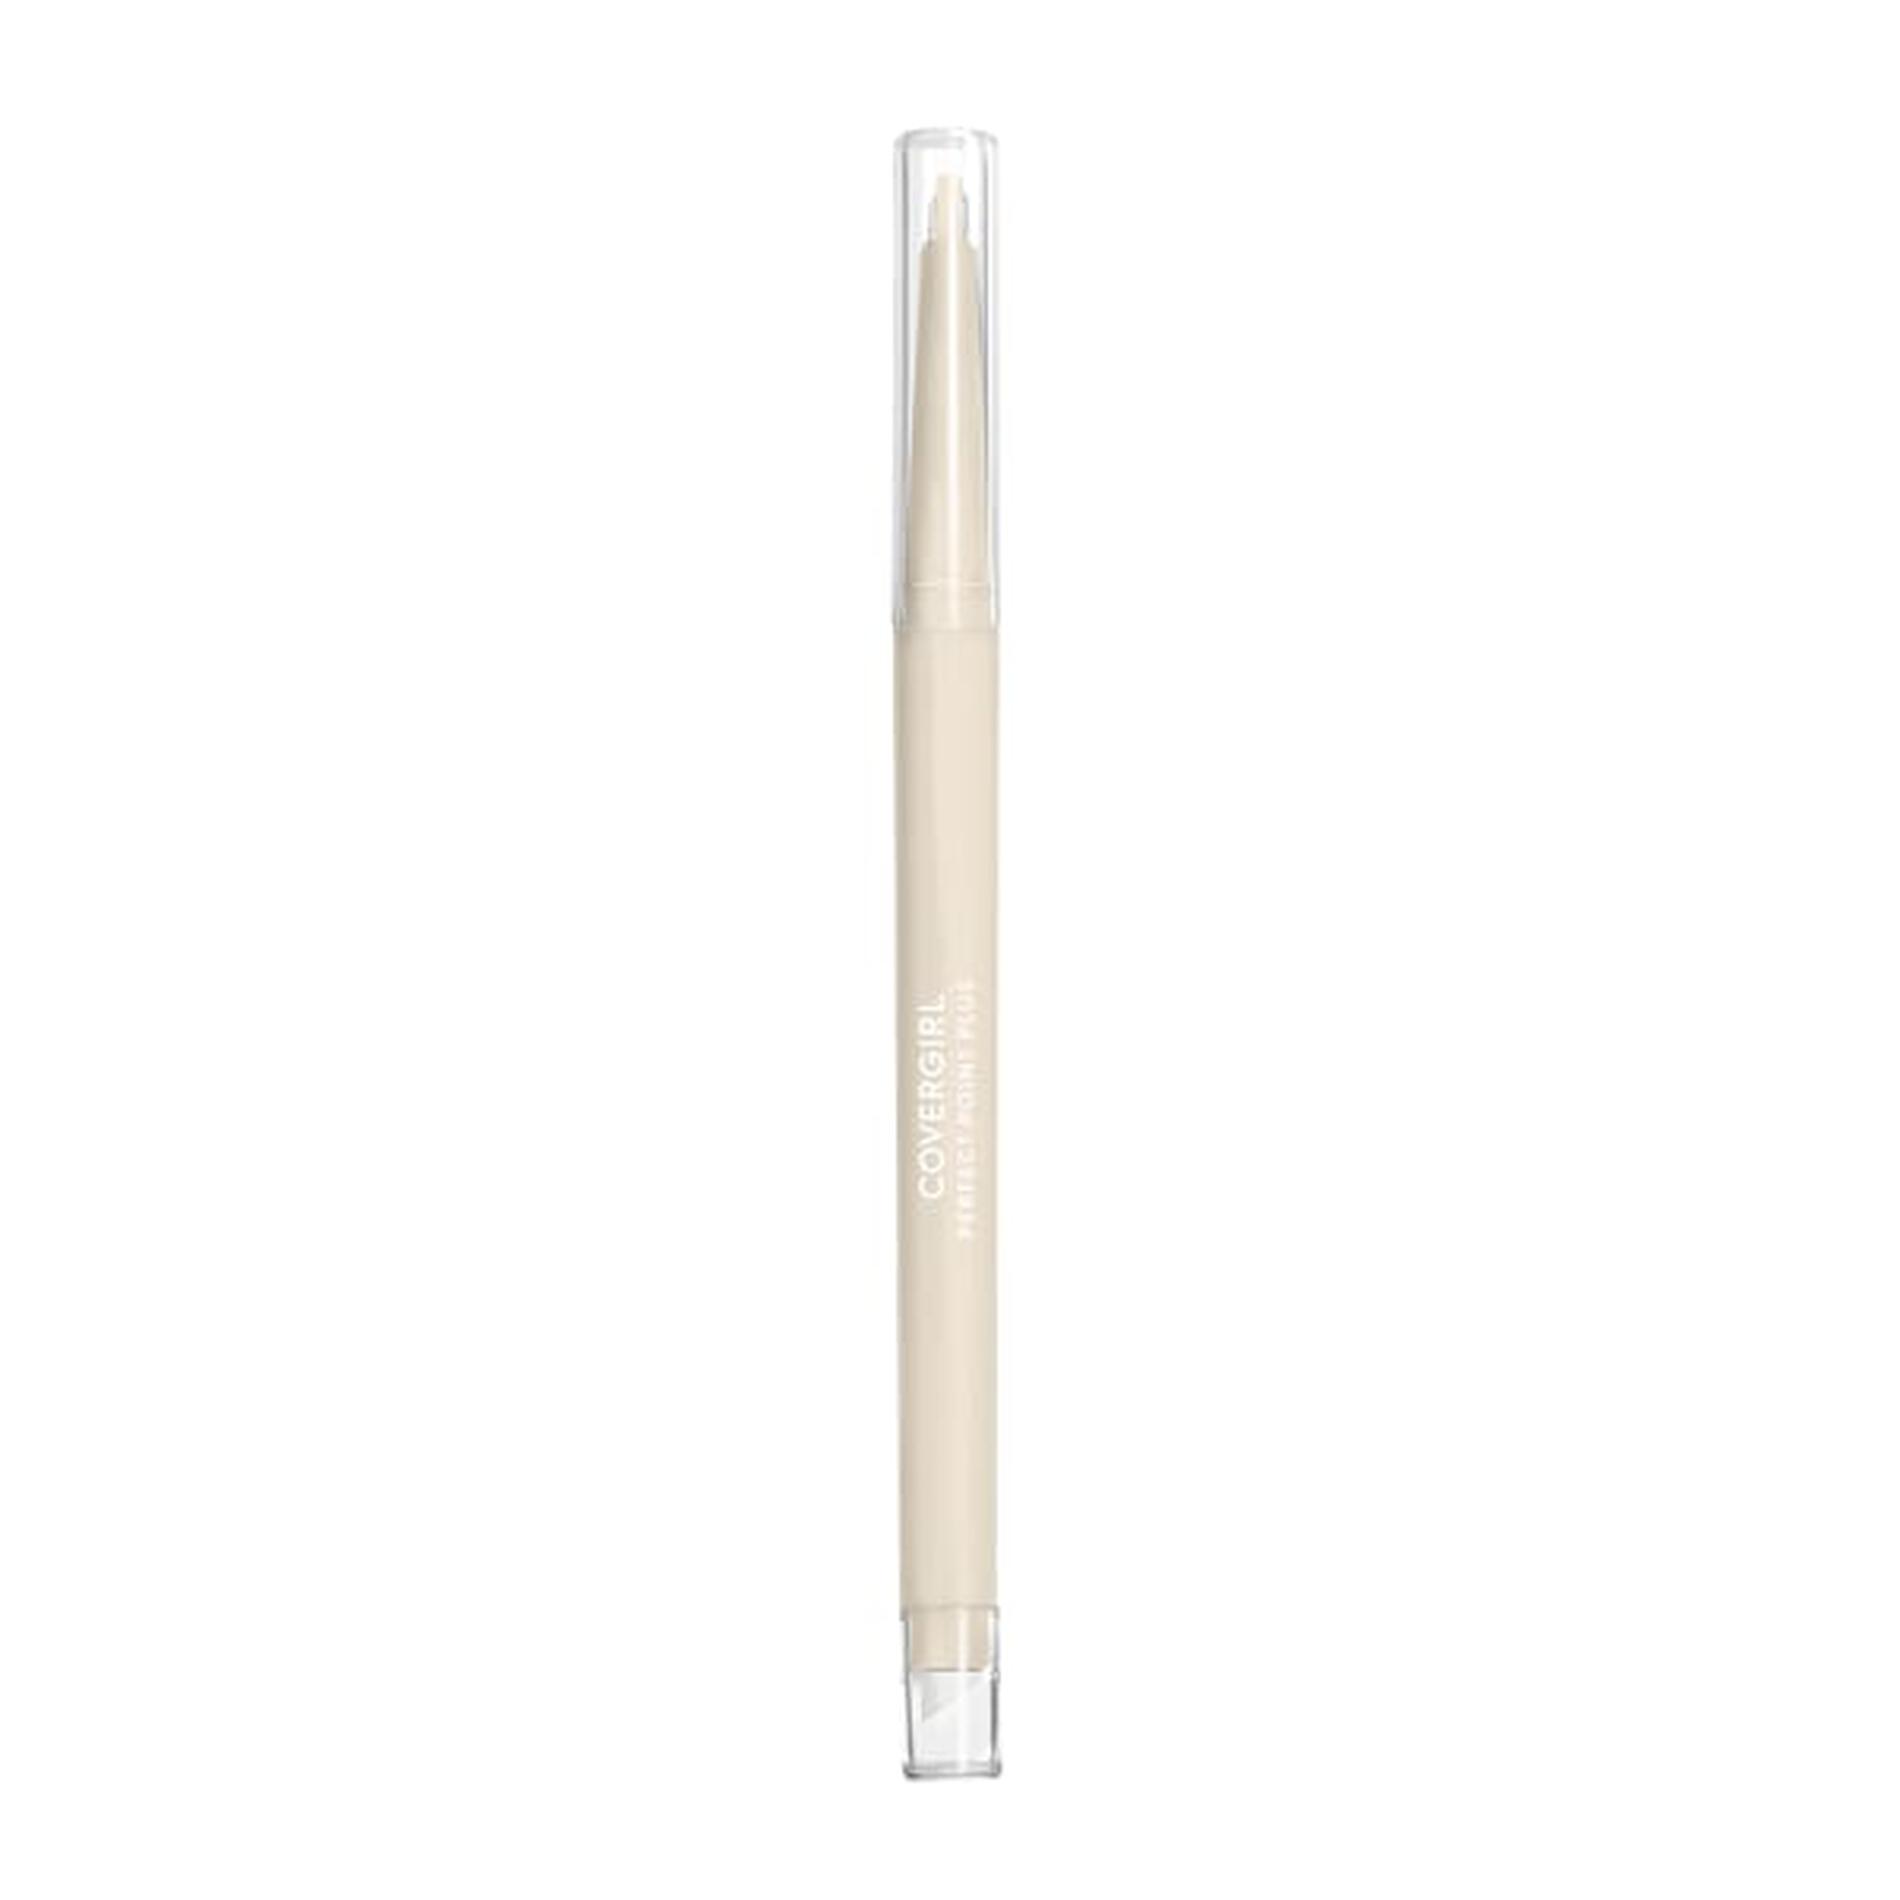 Covergirl Perfect Point Plus Self-Sharpening Eyeliner Pencil